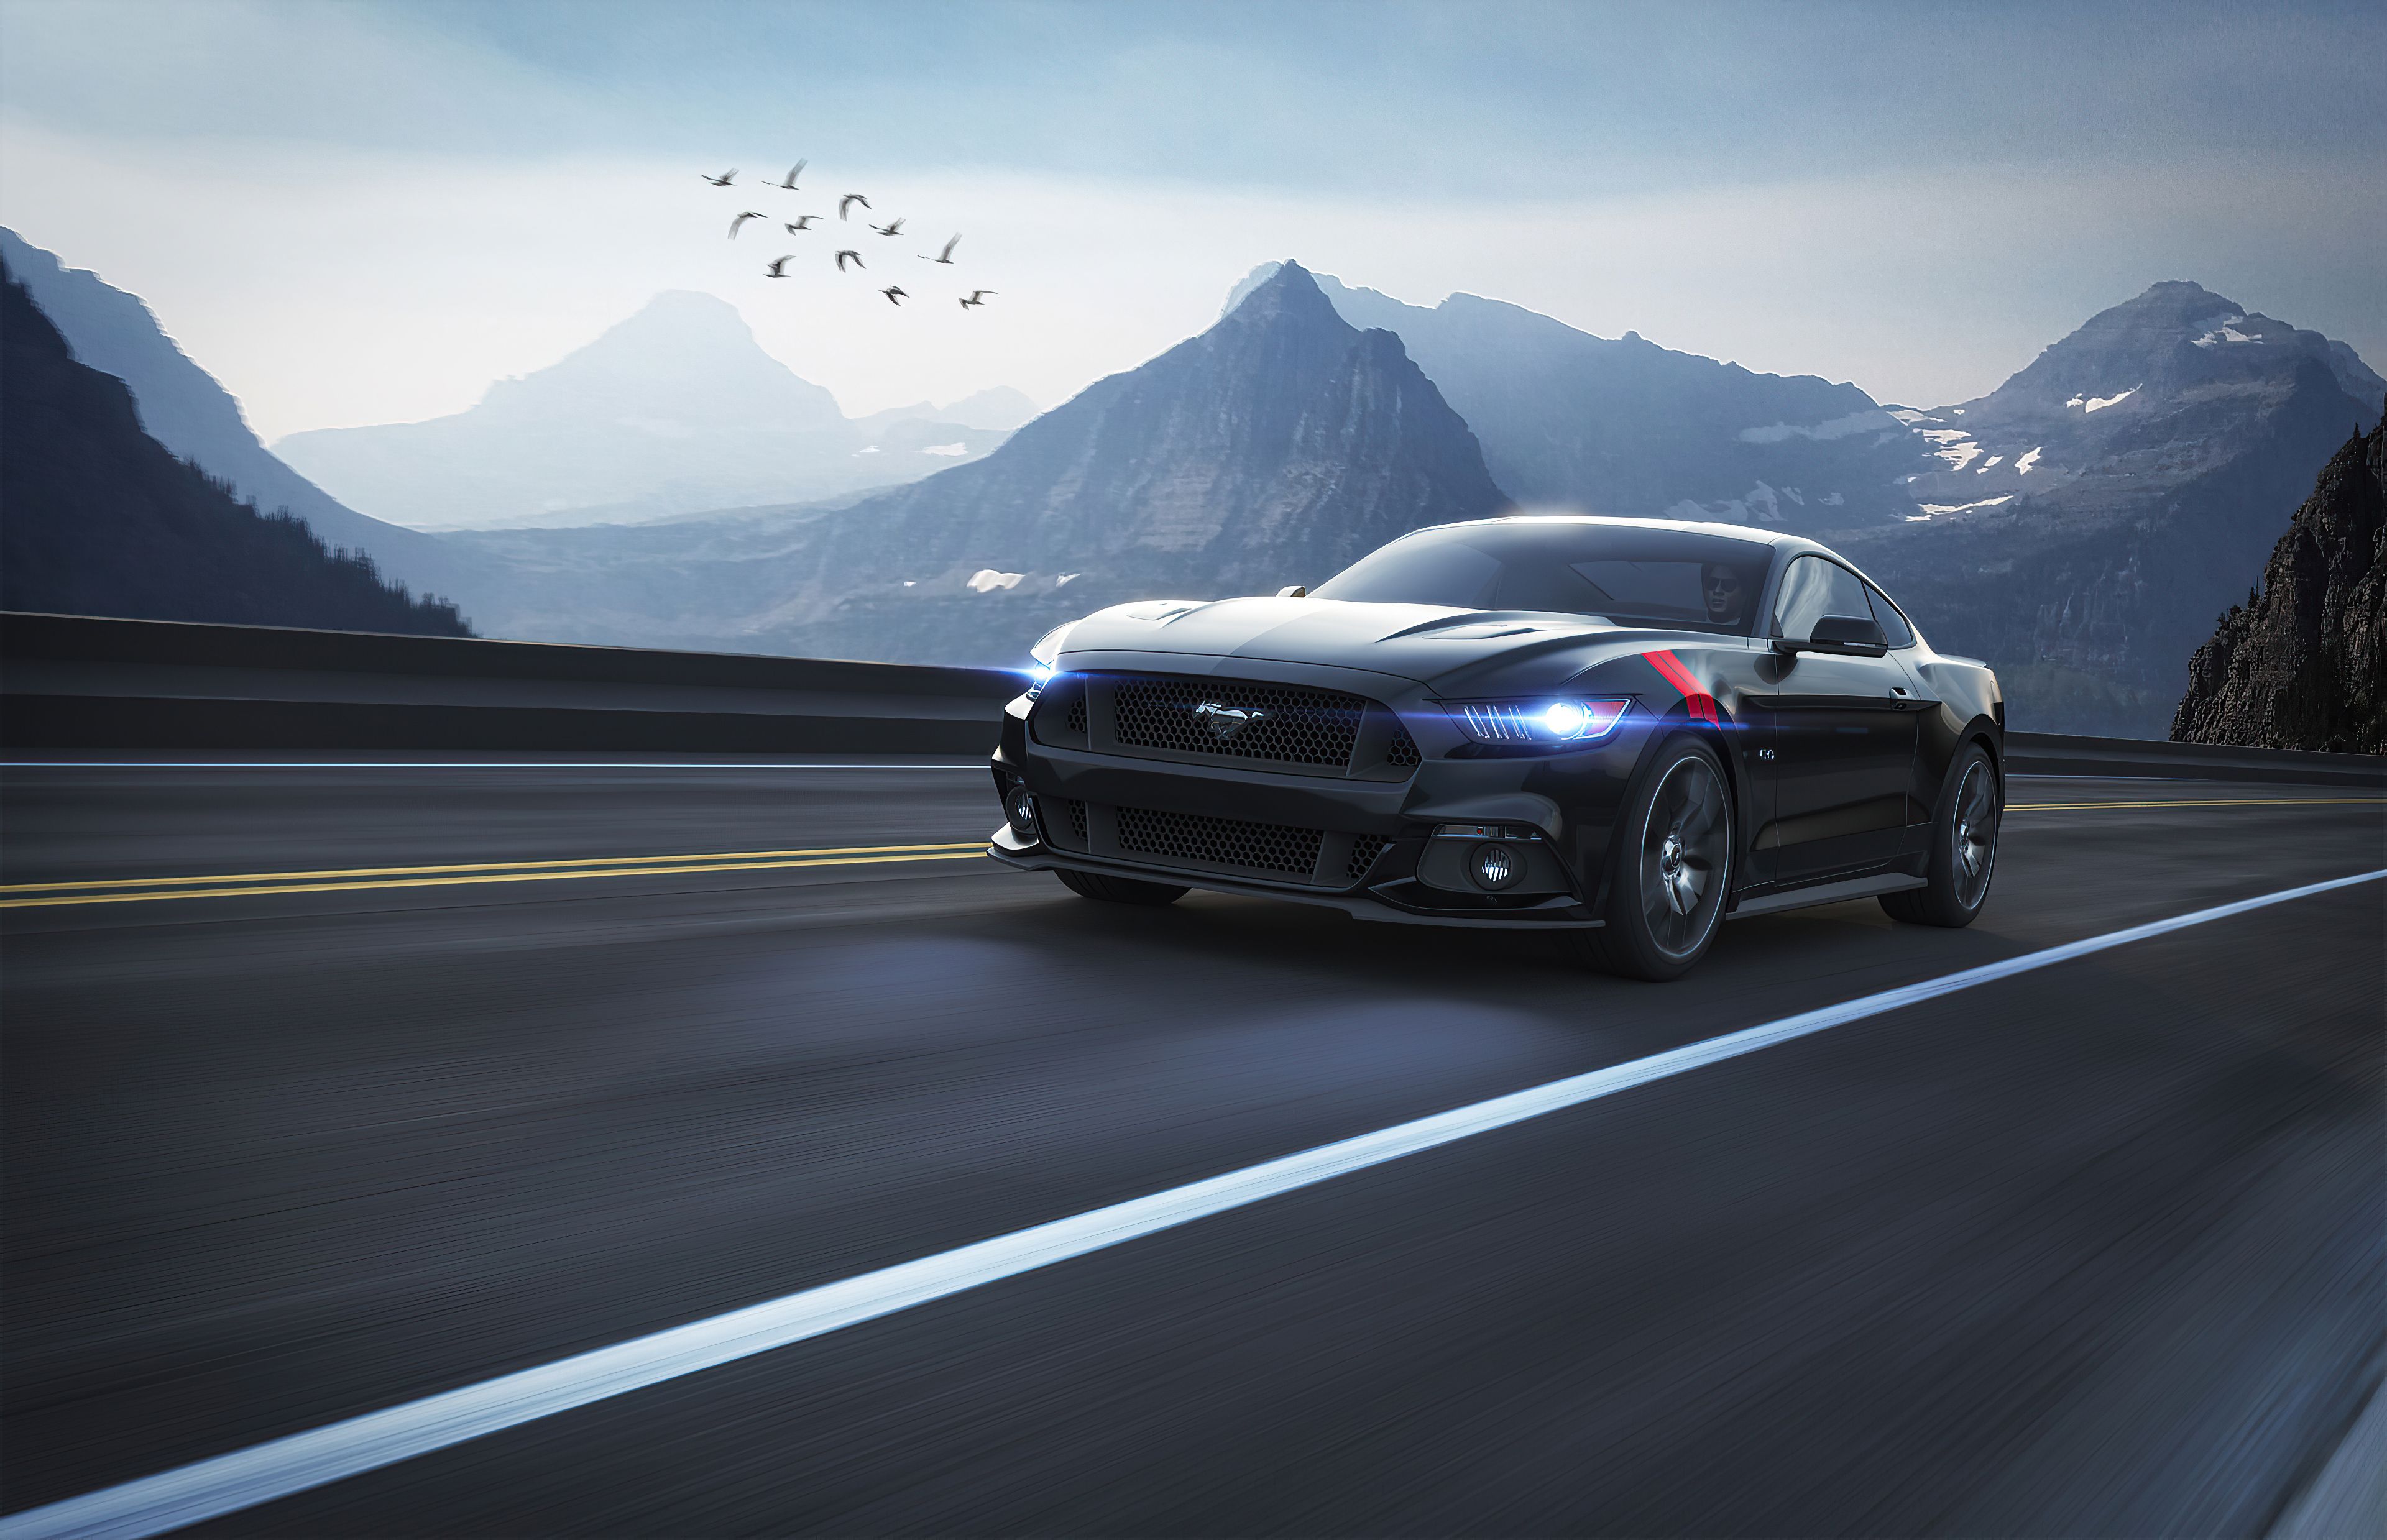 Black Ford Mustang 4k 2020 Nexus Samsung Galaxy Tab Note Android Tablets HD 4k Wallpaper, Image, Background, Photo and Picture